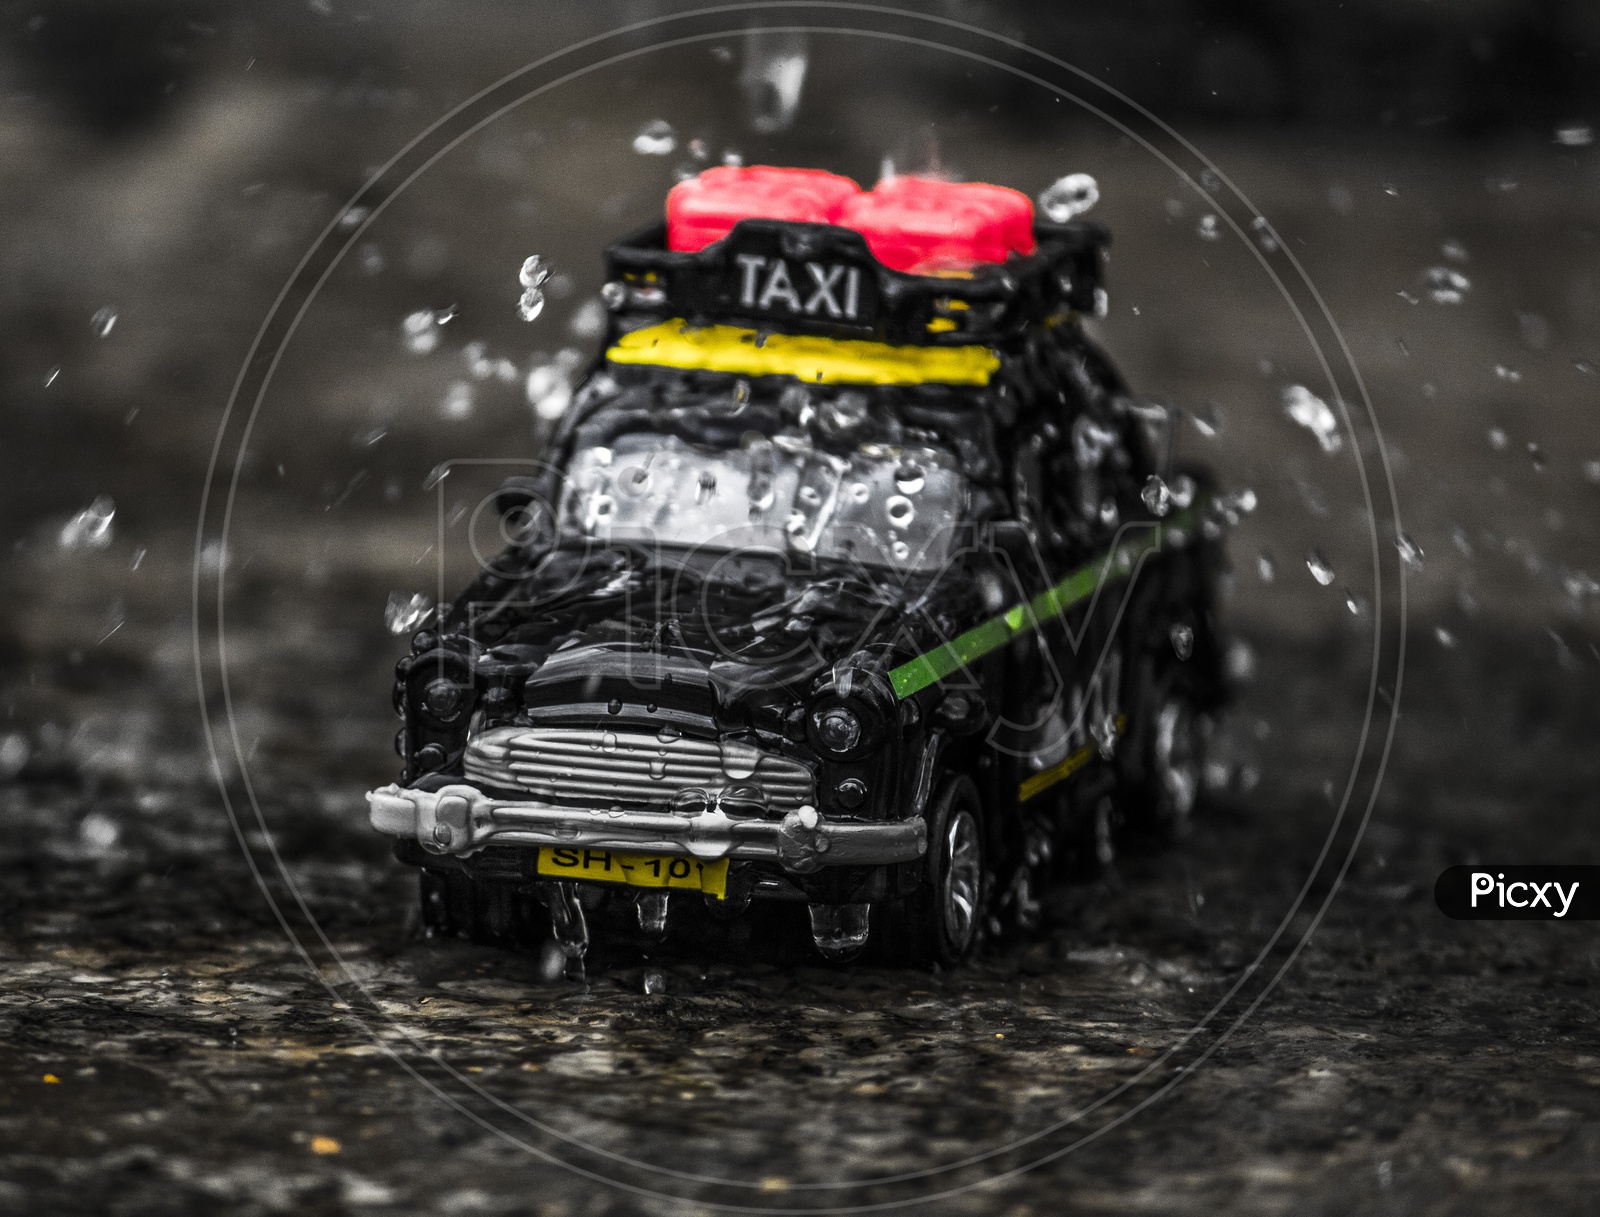 The toy taxi